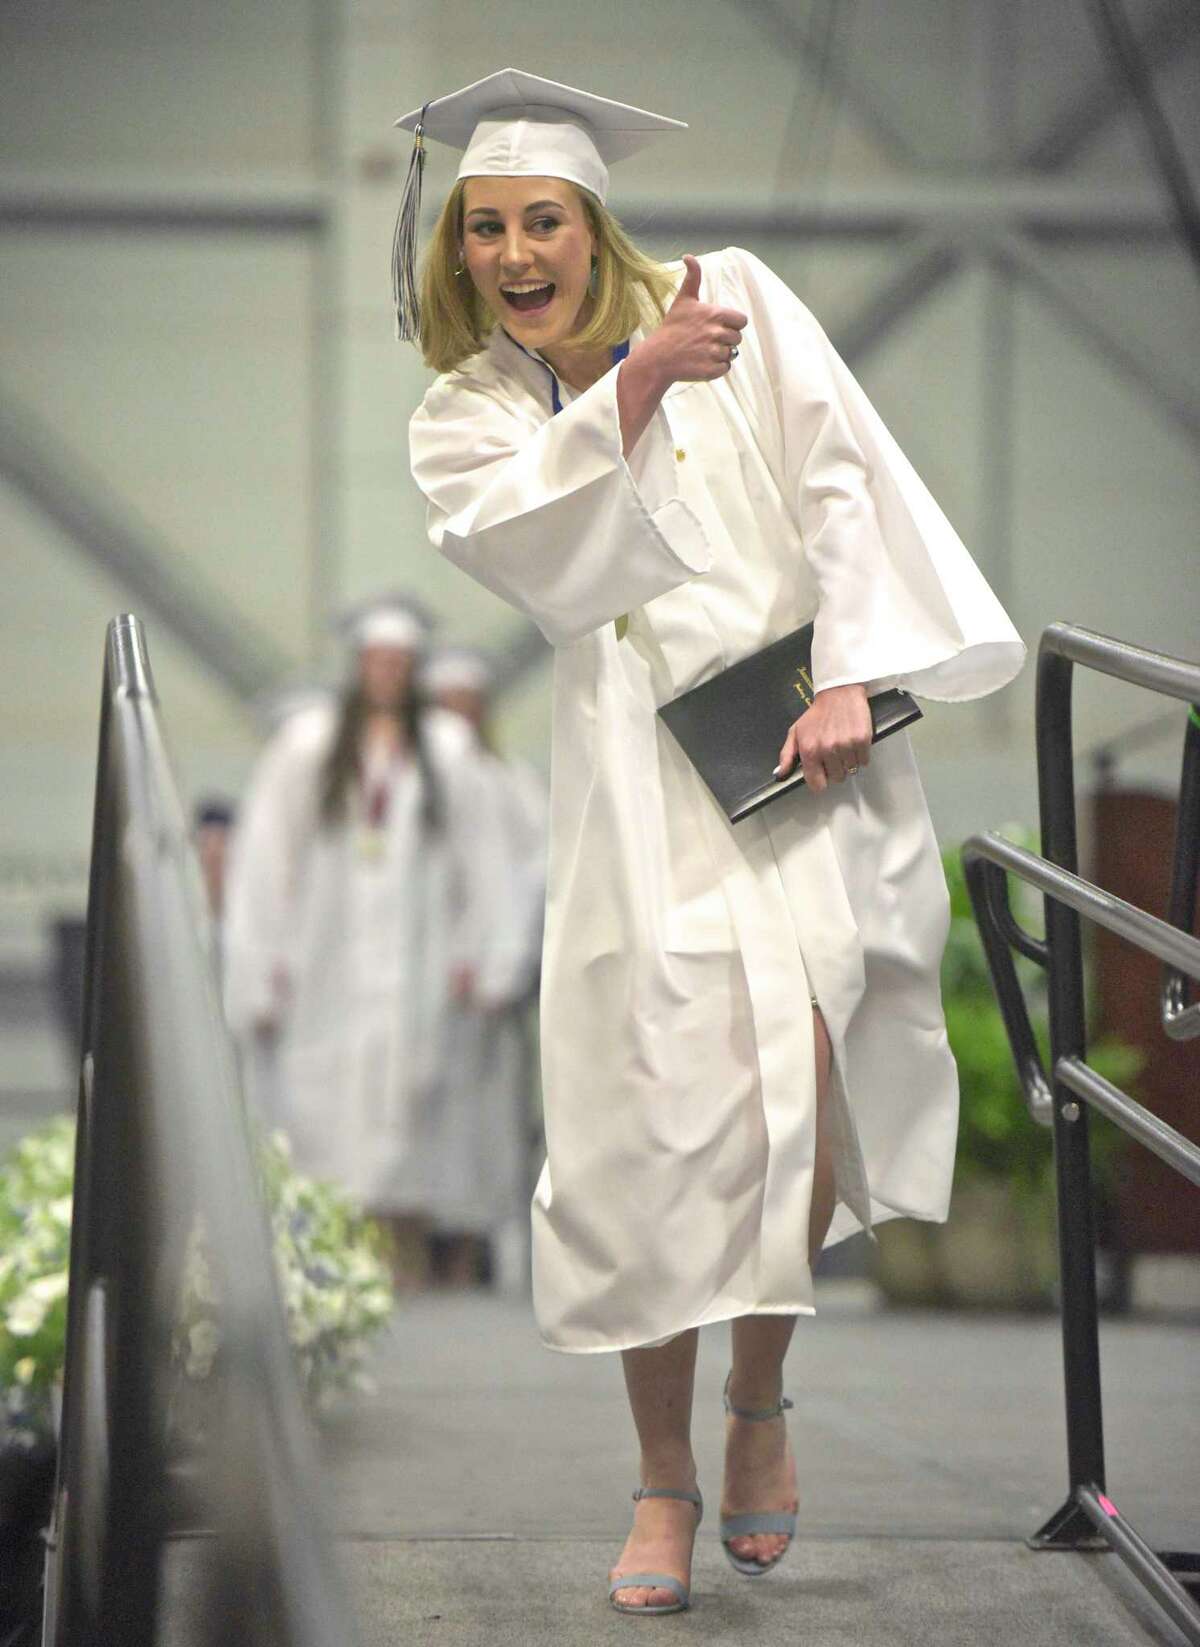 Claire Cavan Goode give the thumbs up after recieving her diploma during the 2018 Immaculate High School Commencement, Wednesday, June 6, 2018, at the O'Neill Center, Western Connecticut State University, Danbury, Conn.